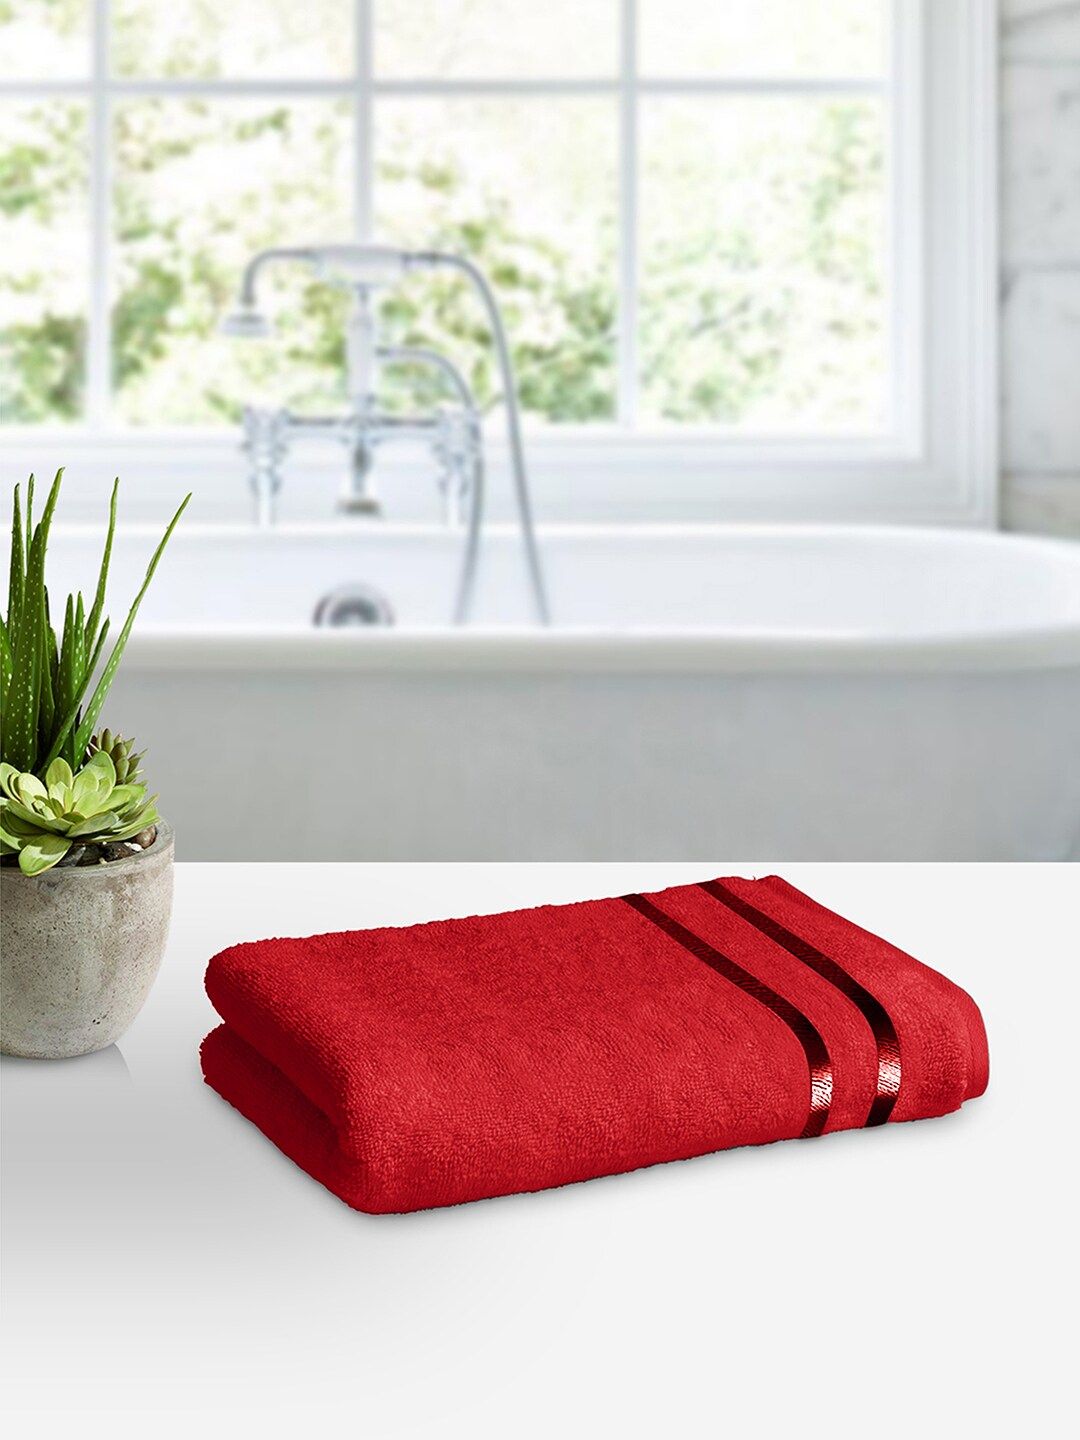 Story@home Maroon Cotton 450 GSM Bath Towel Price in India